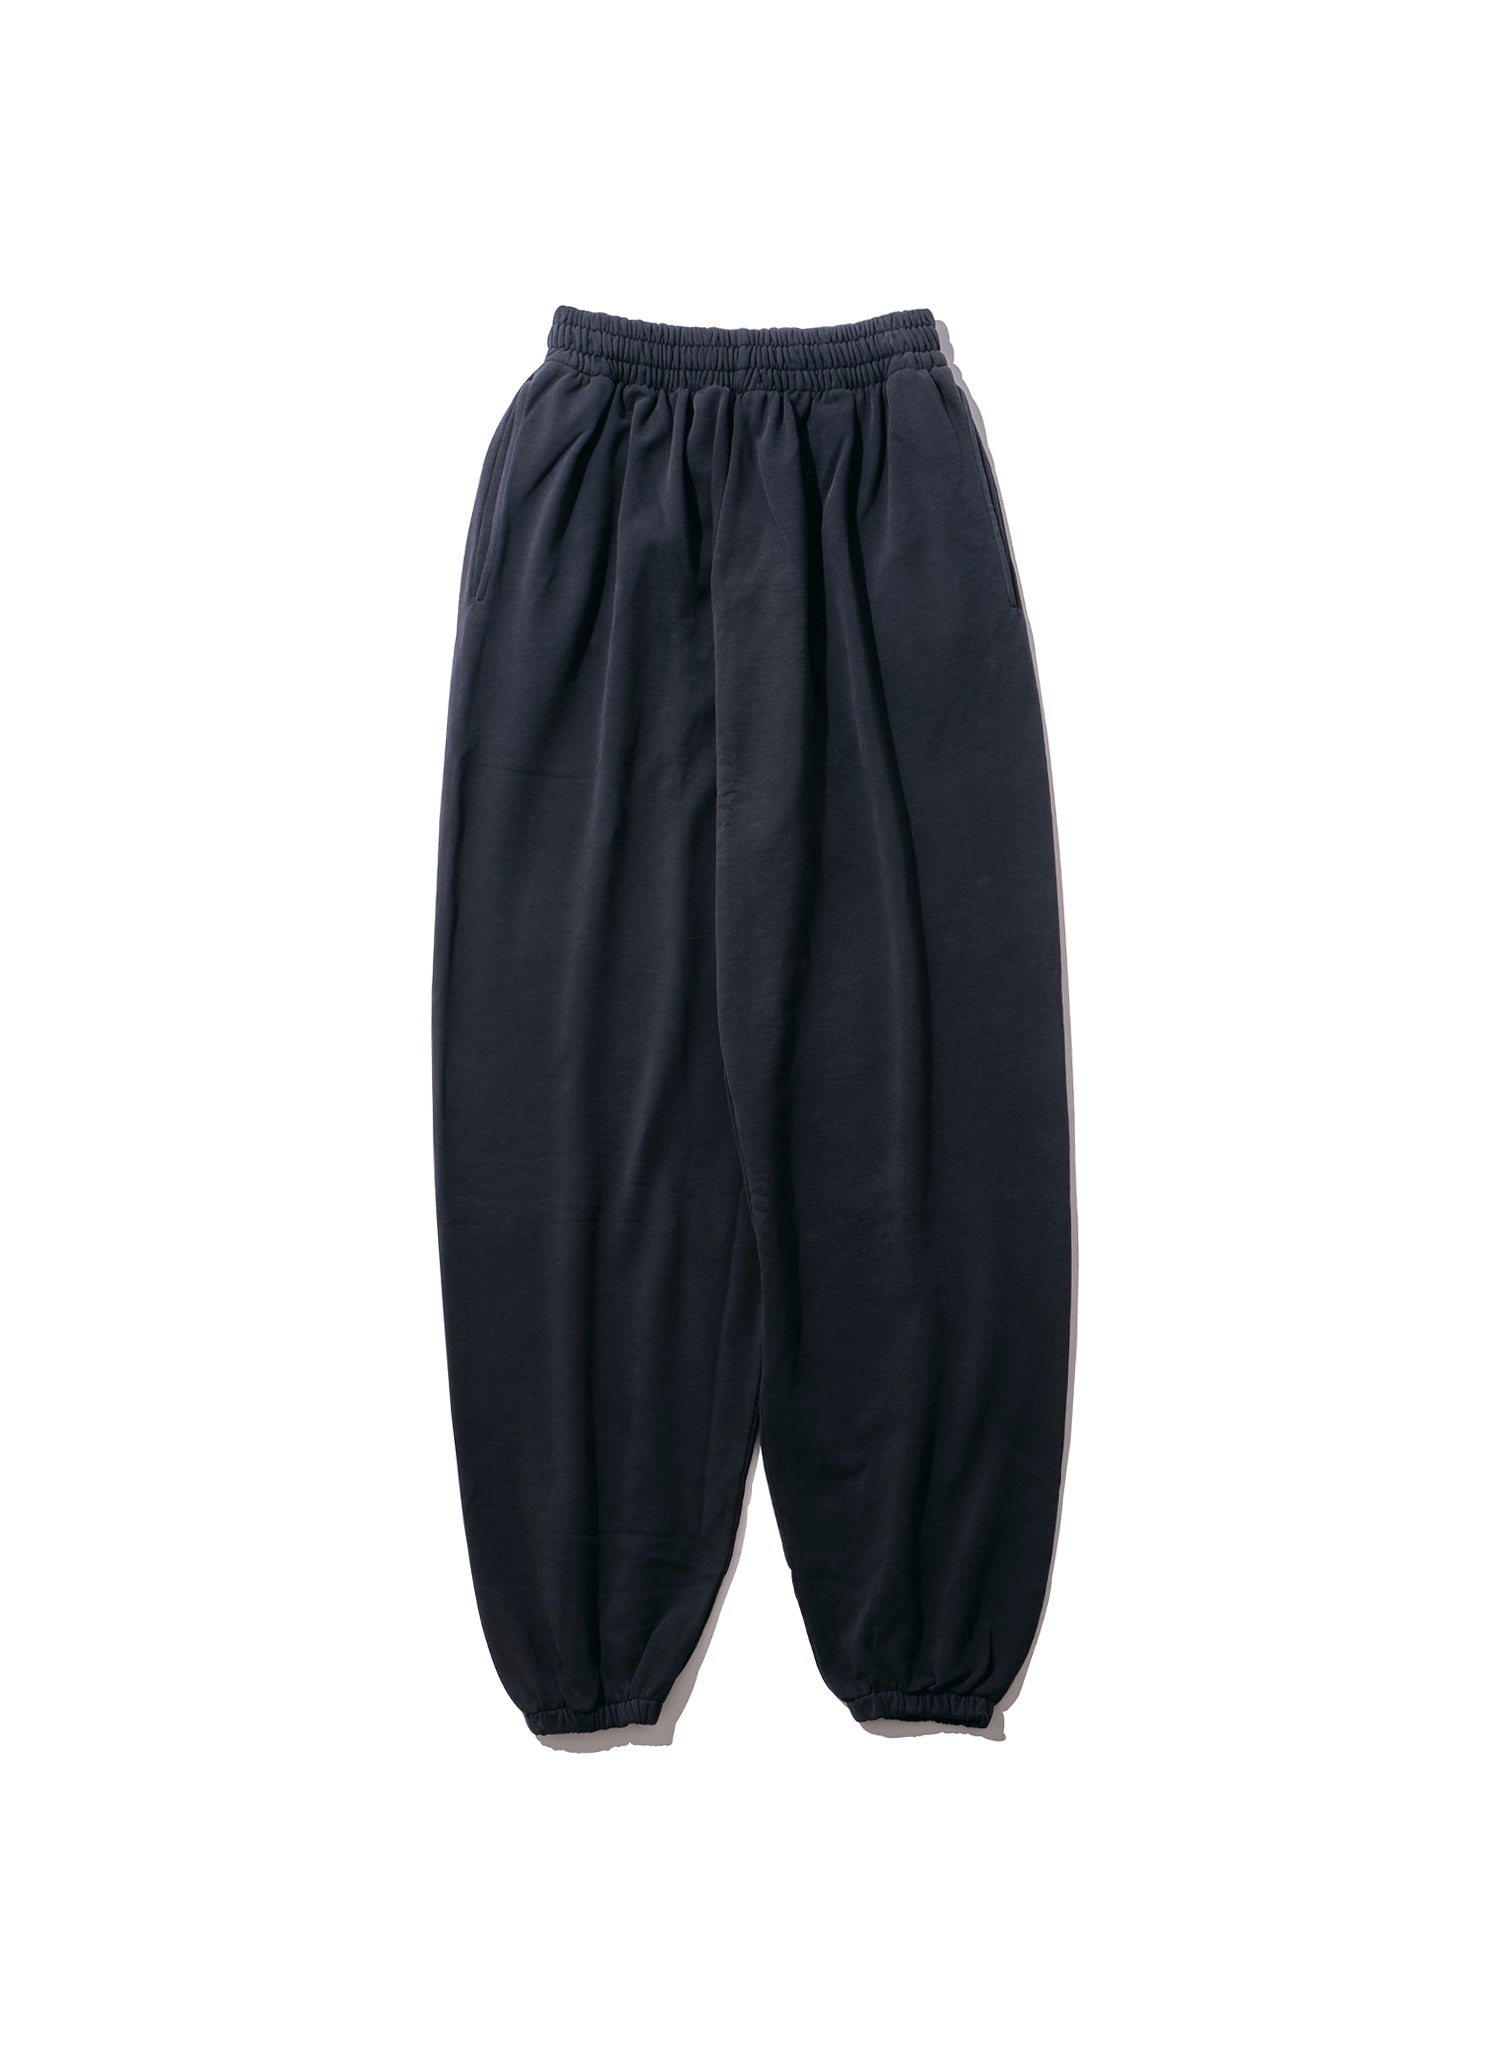 WILLY CHAVARRIA / BASIC SWEAT PANTS CHEMICAL BLACK